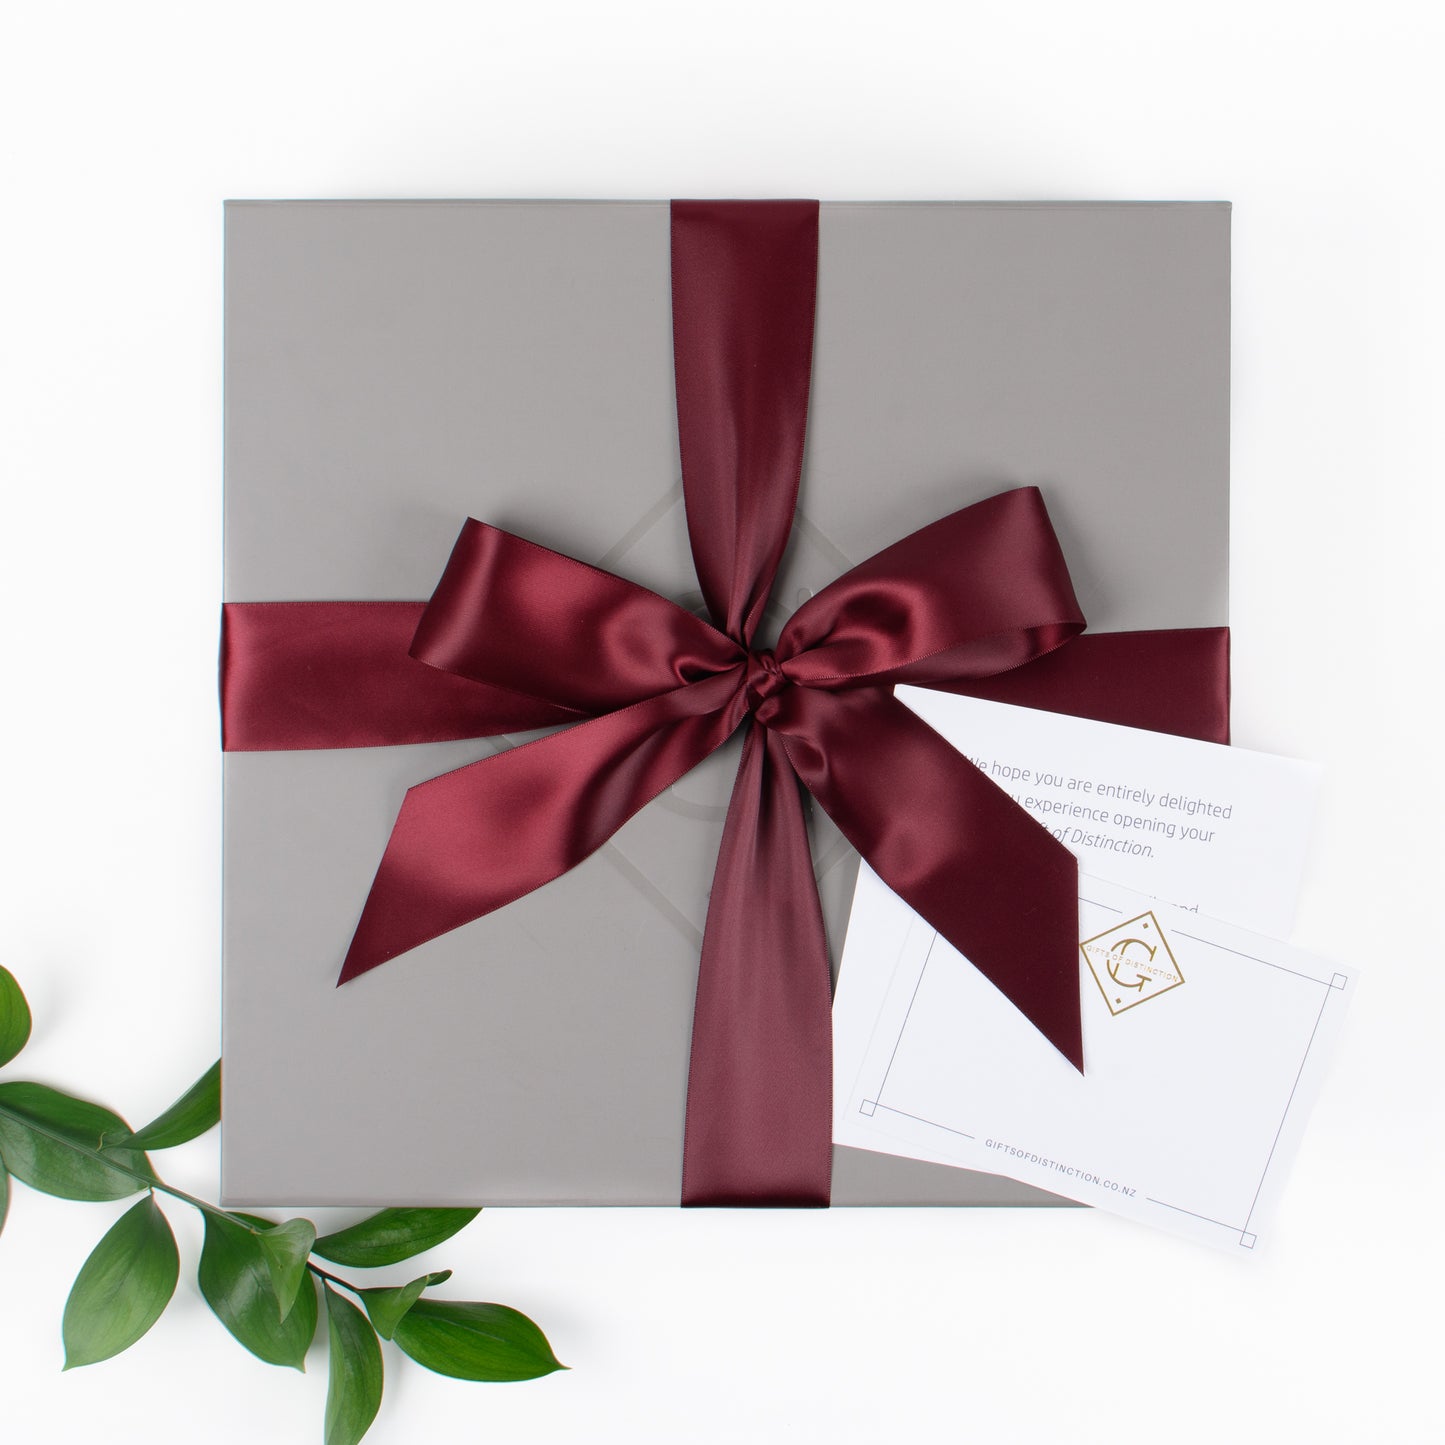 The Gentleman - Gift Boxes NZ - Gifts of Distinction